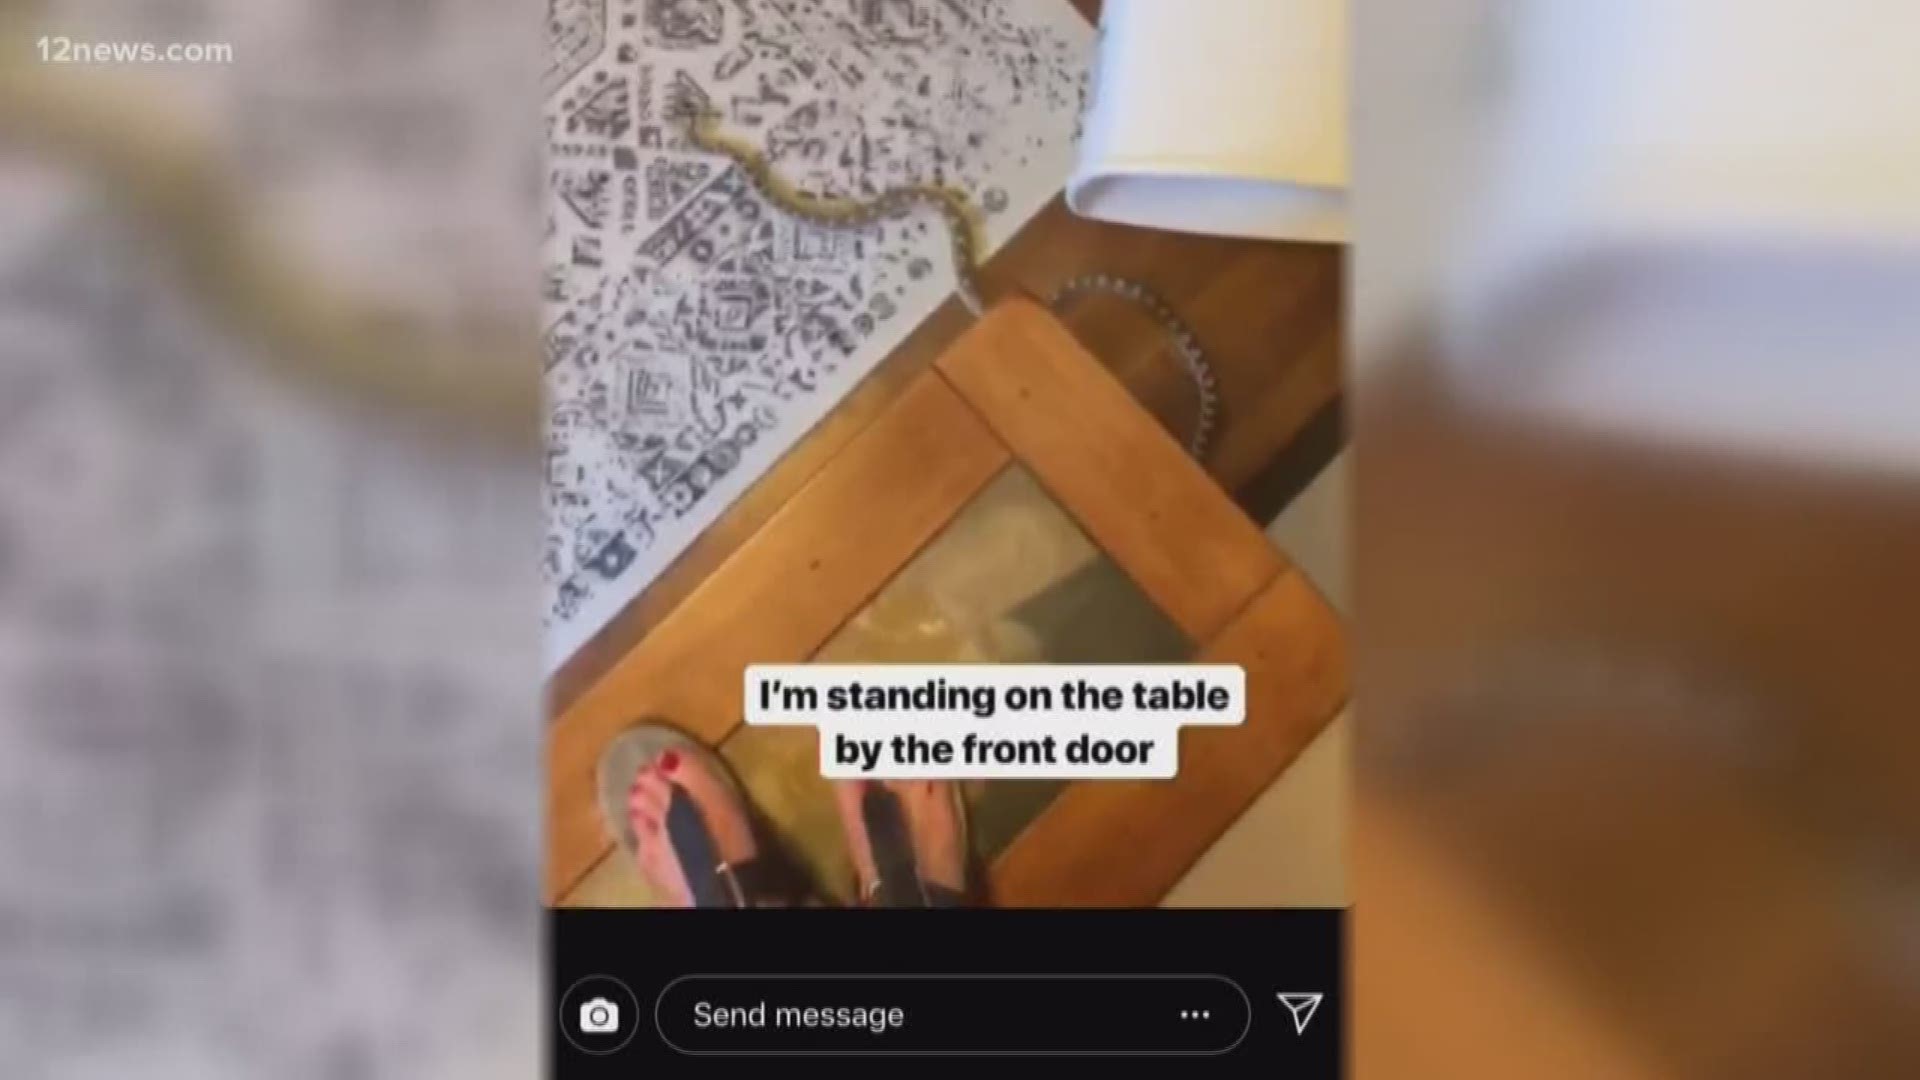 The temperatures are up, and the snakes are out. And for one Valley family, they're in ... as in, in their home. The Instagram story is raising the hair on a lot of our necks, but how can you tell the difference between a venomous snake and one that is fairly harmless?